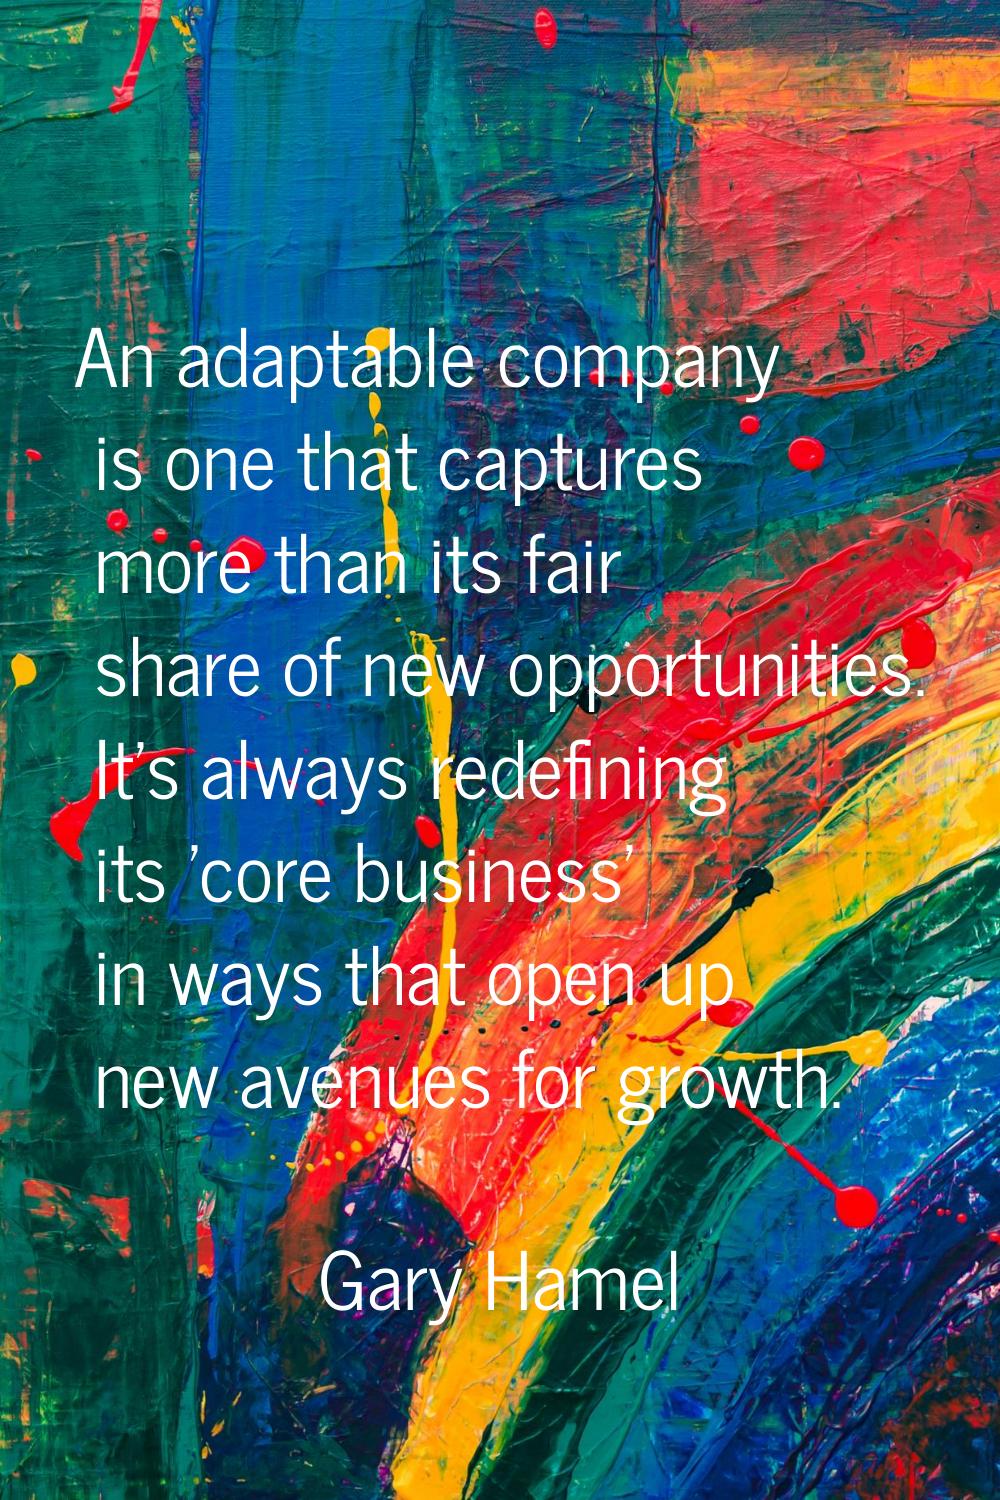 An adaptable company is one that captures more than its fair share of new opportunities. It's alway